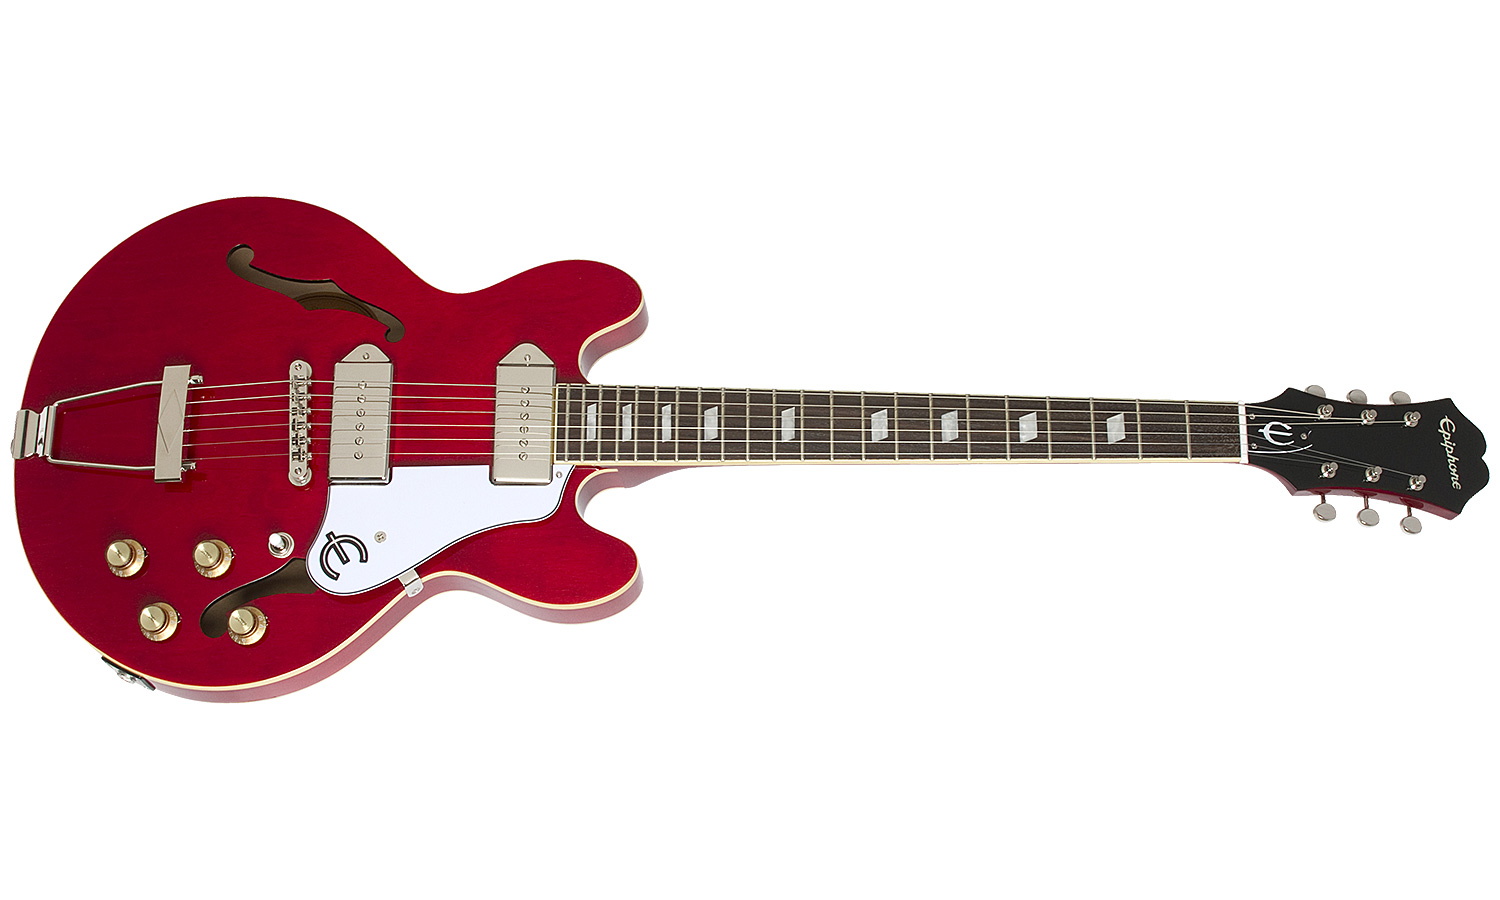 Epiphone Casino Coupe 2p90 Ht Pf - Cherry - Semi-hollow electric guitar - Variation 1